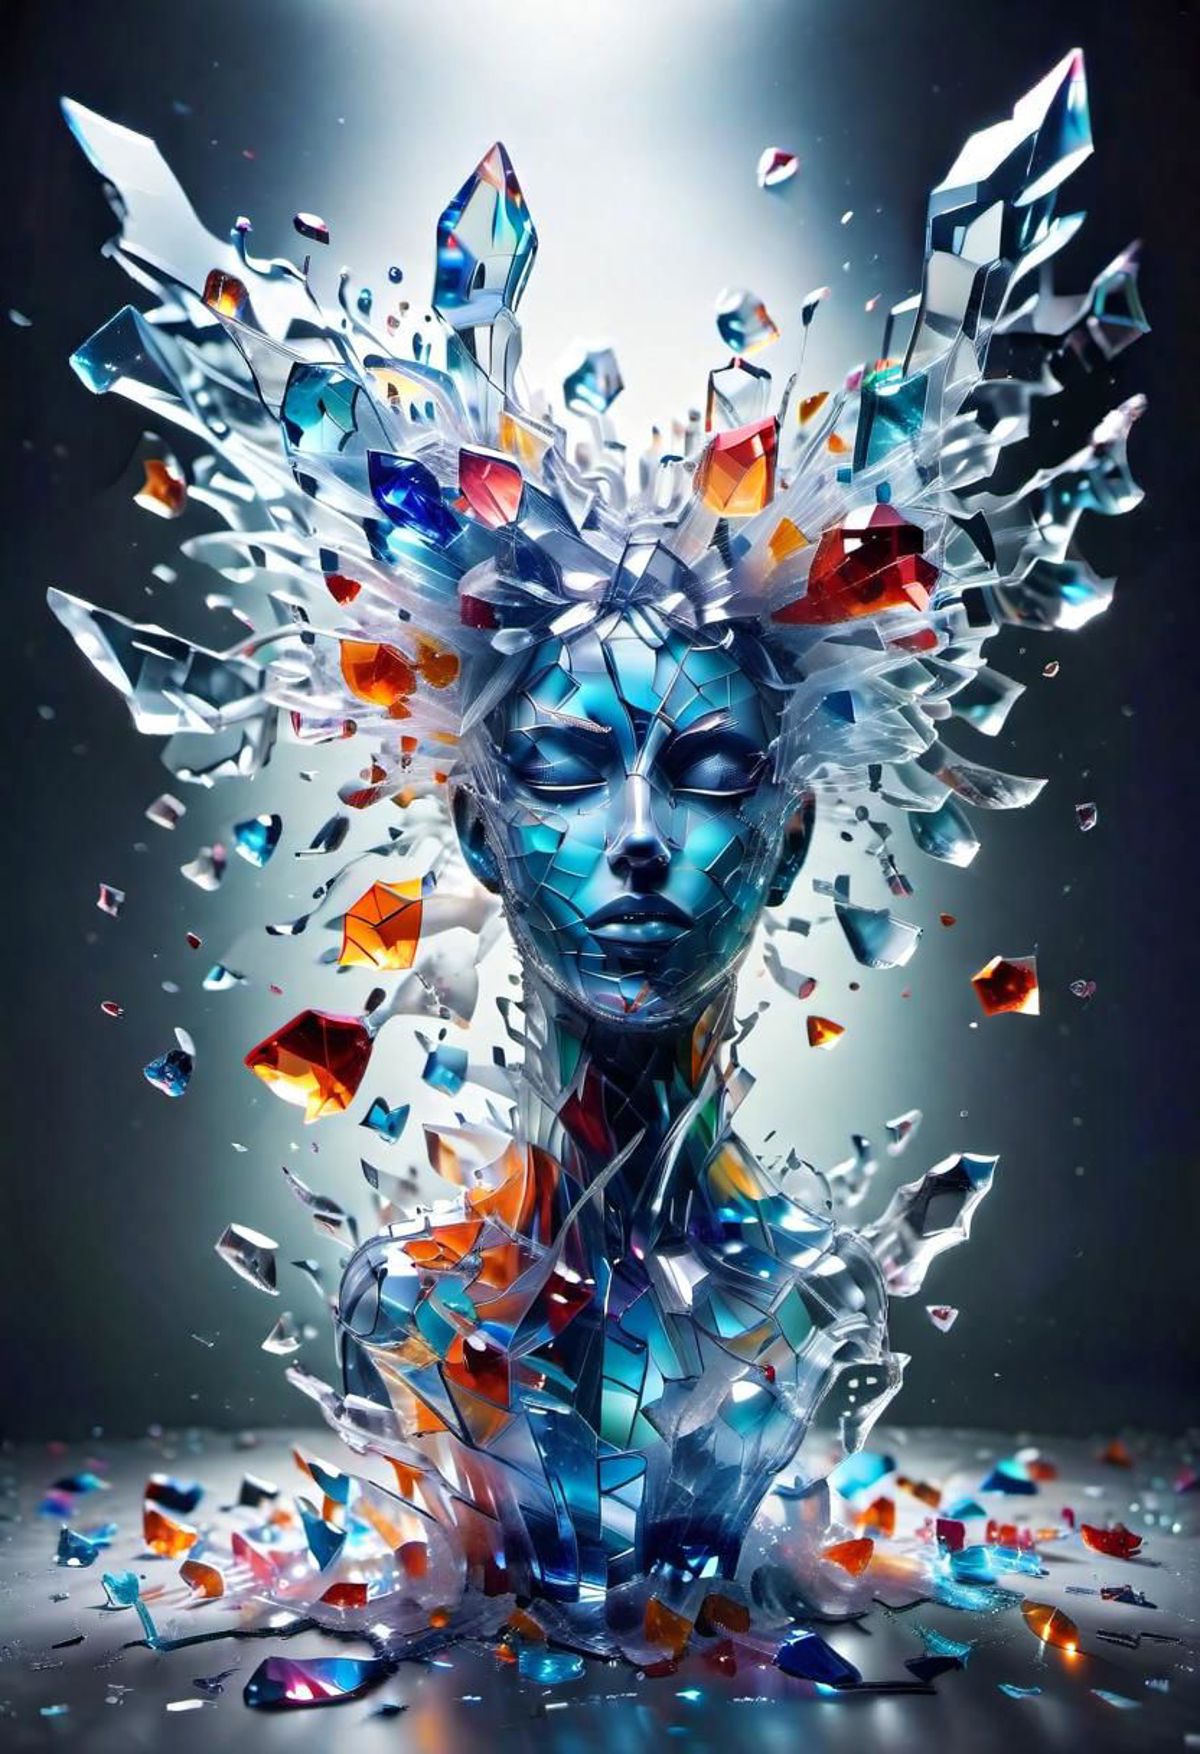 A woman's face made of glass shards and colored glass pieces.